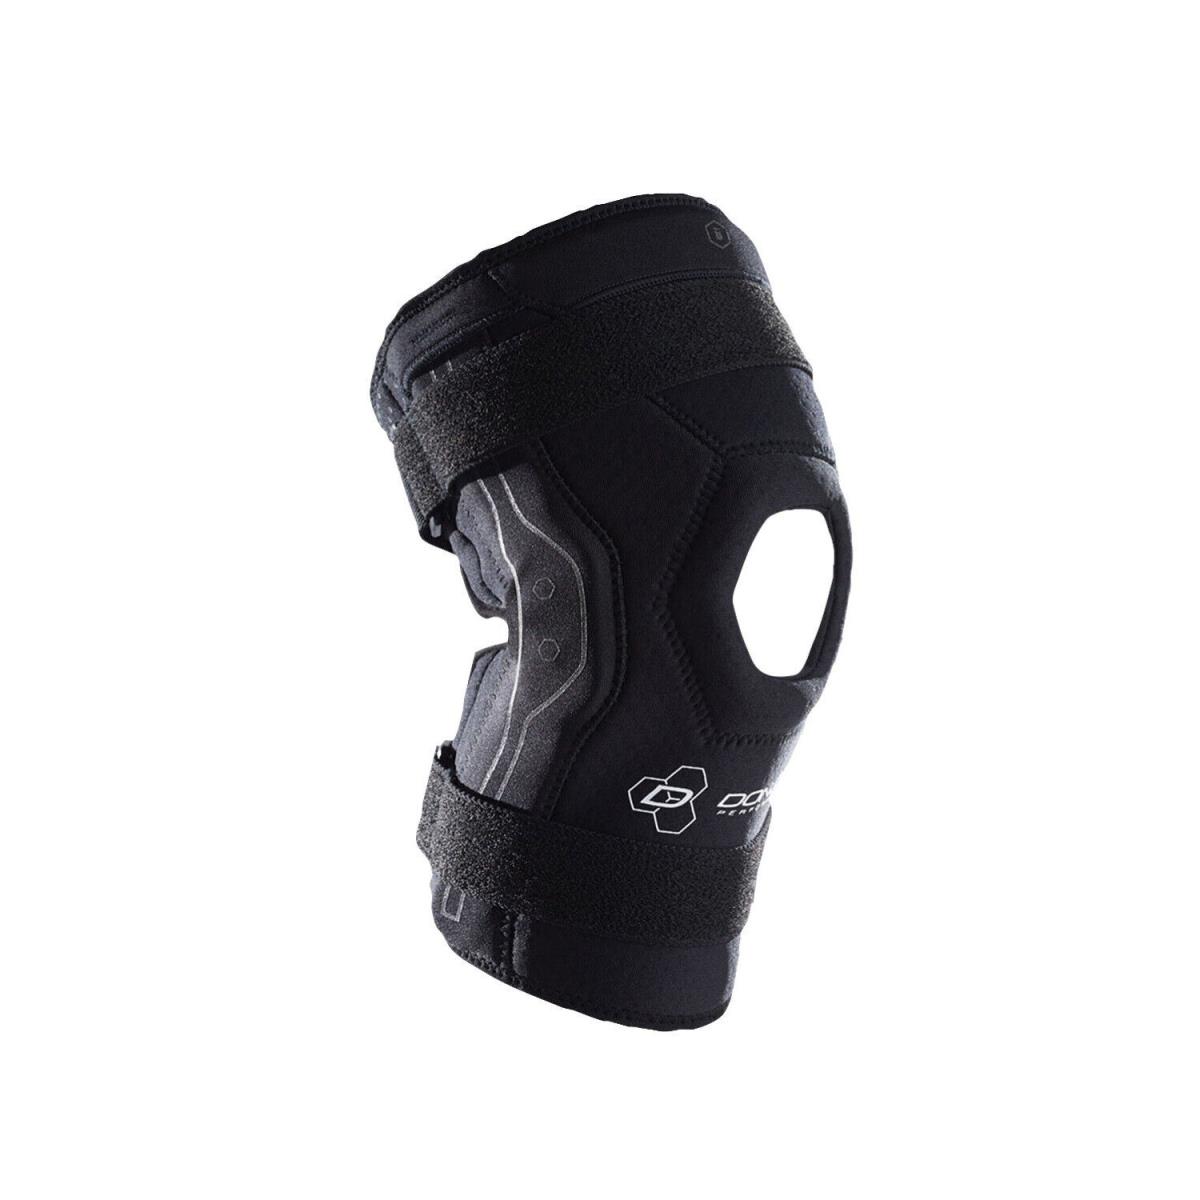 Donjoy Performance Bionic Knee Brace with Chattanooga Polyurethane Colpac